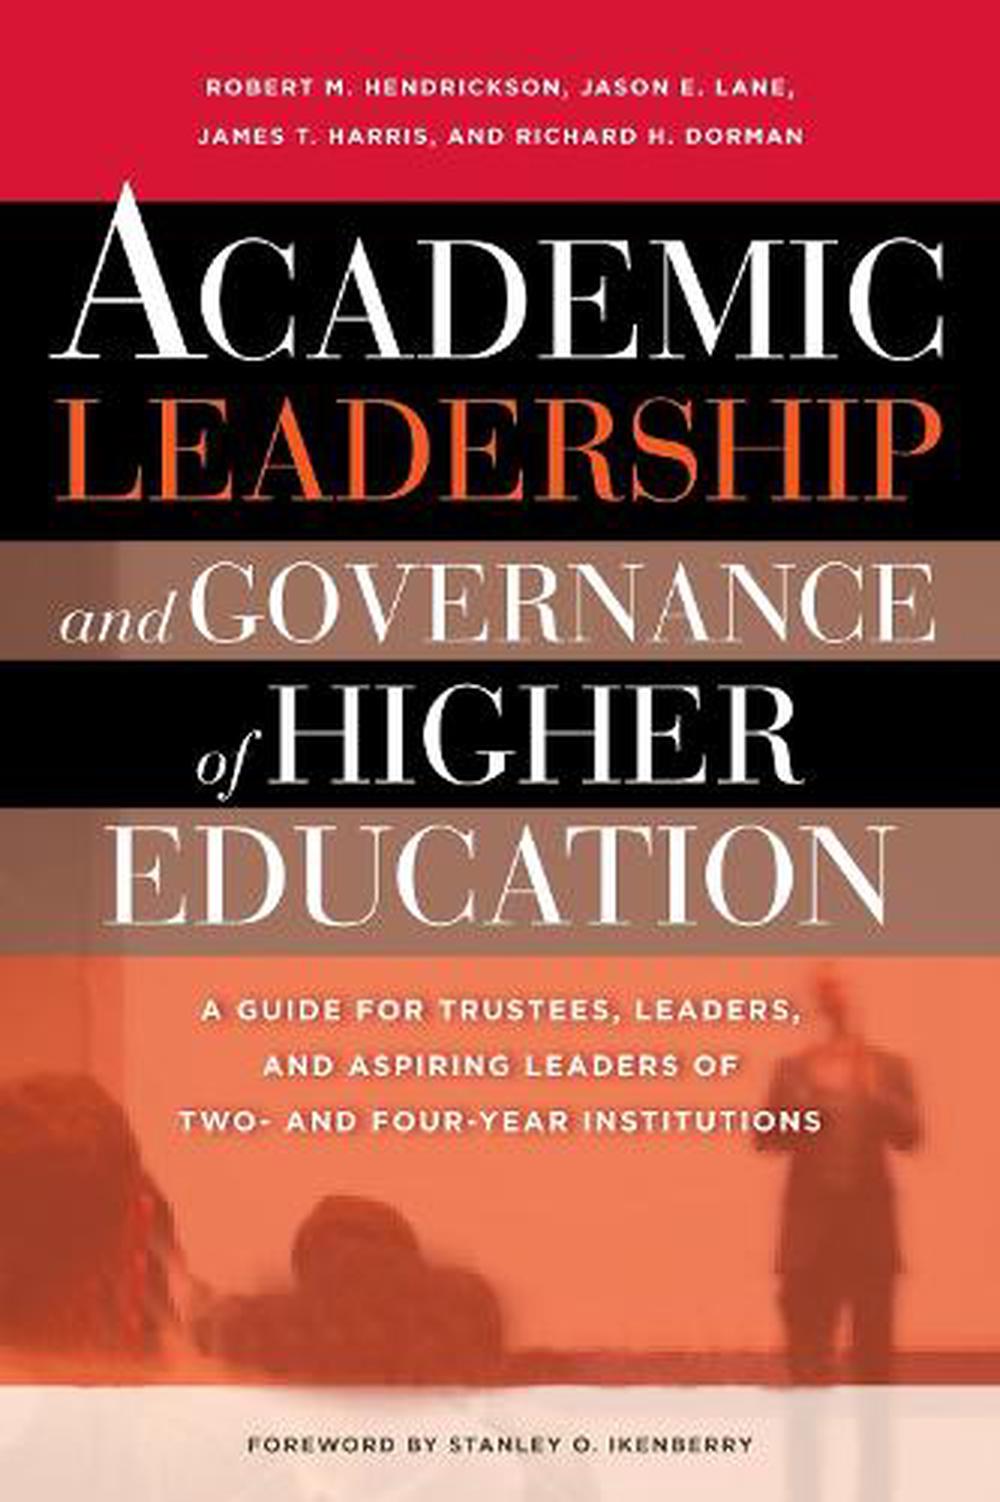 research on academic leadership